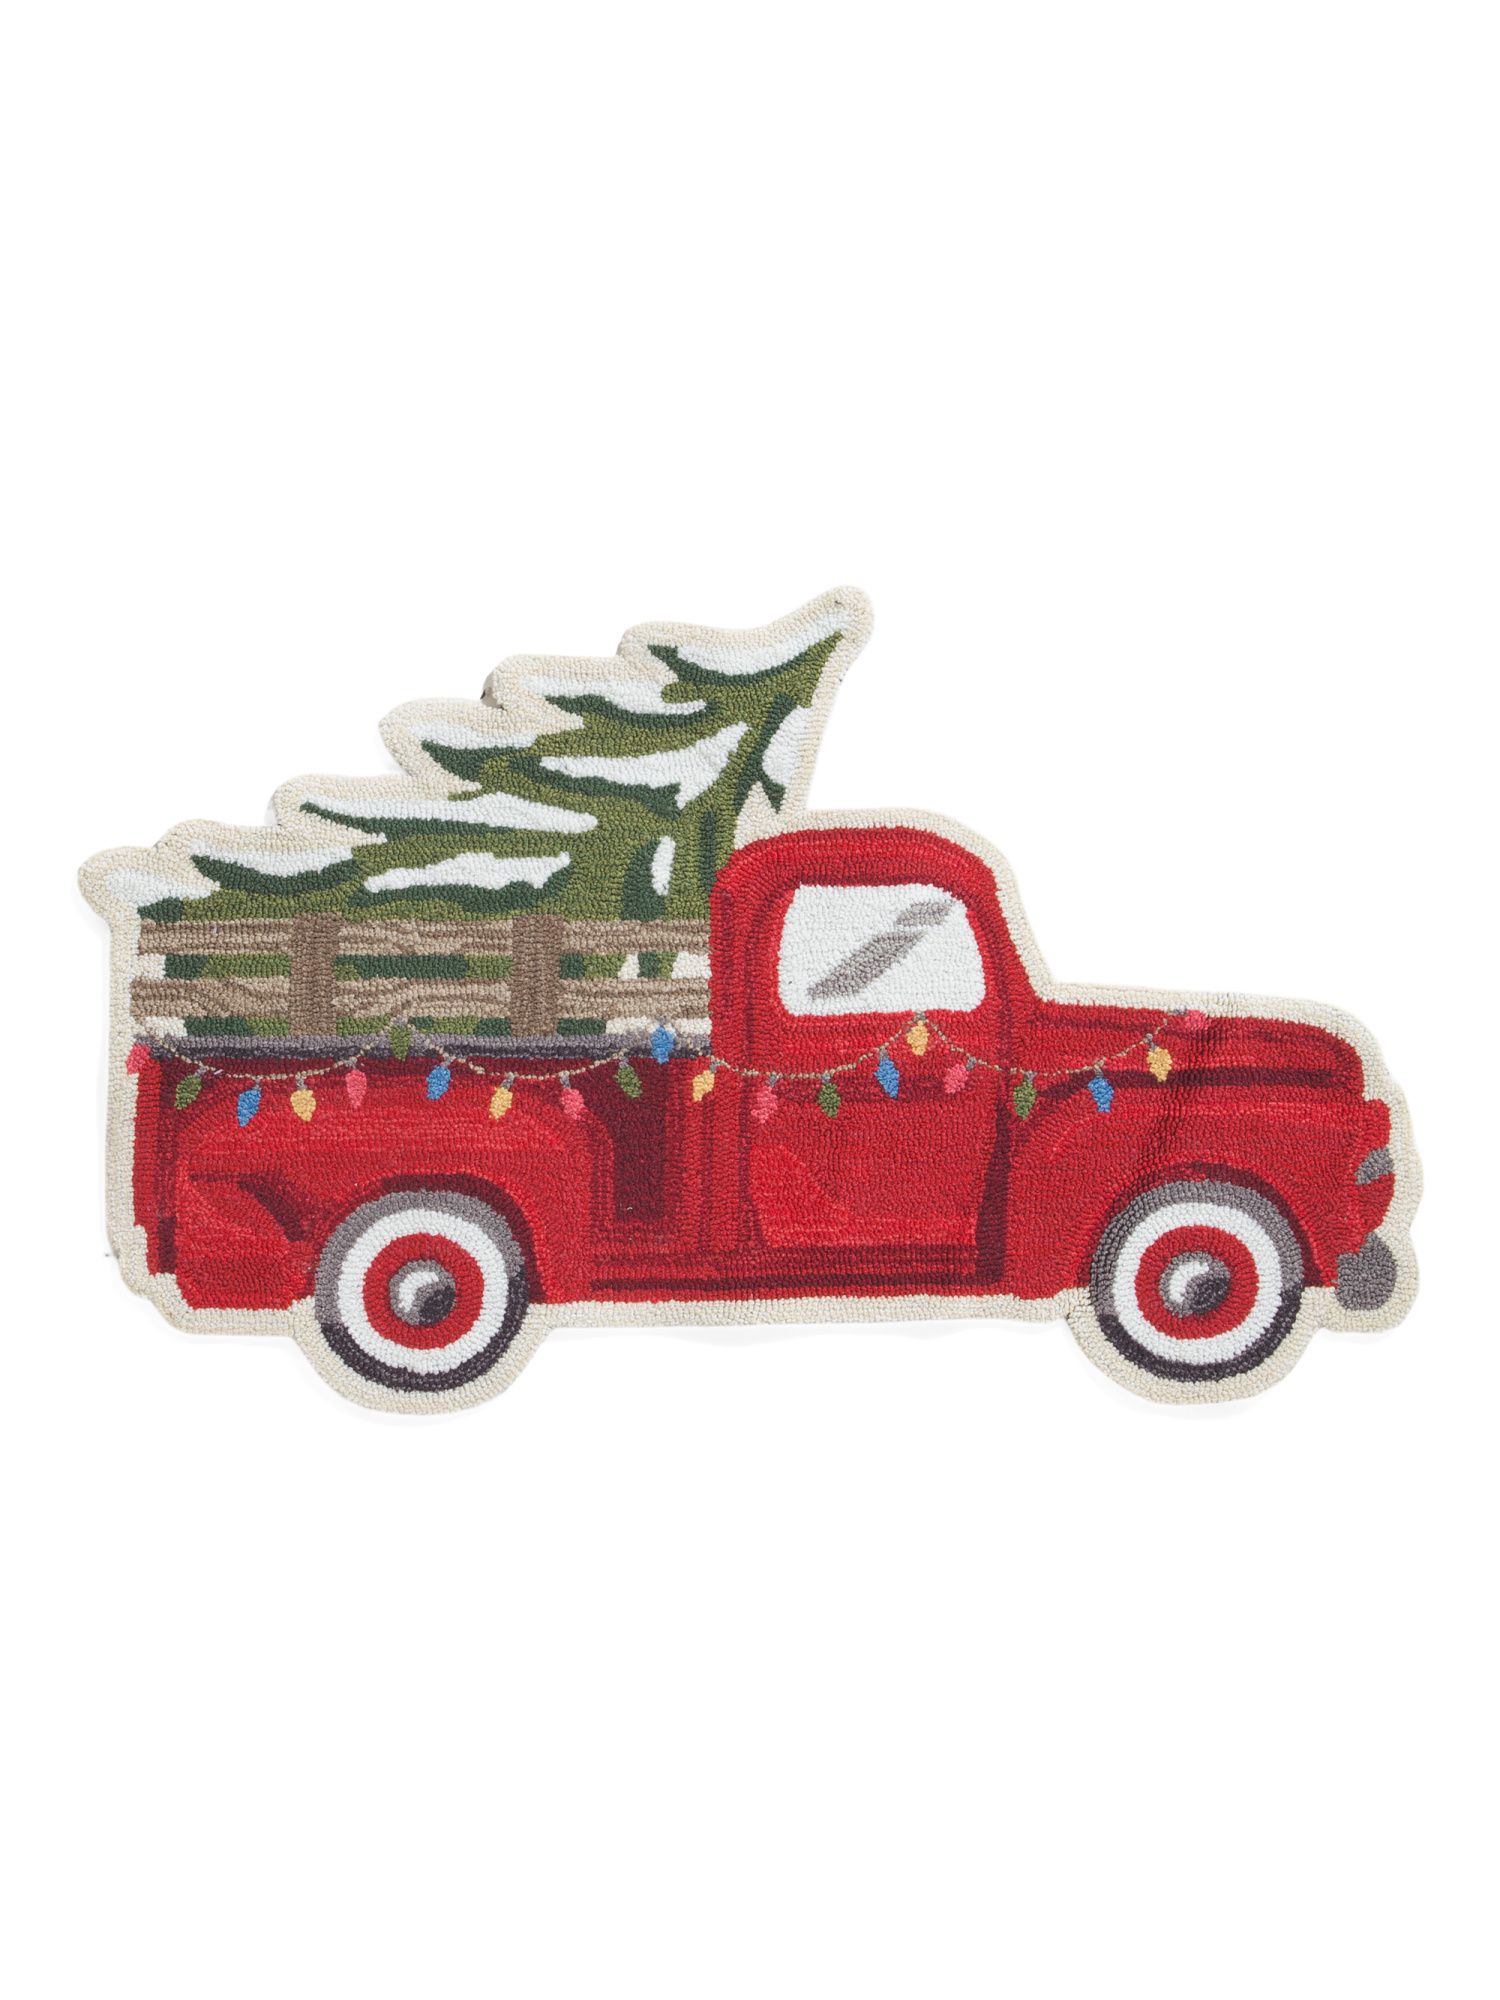 27x45 Truck Hooked Scatter Rug | TJ Maxx